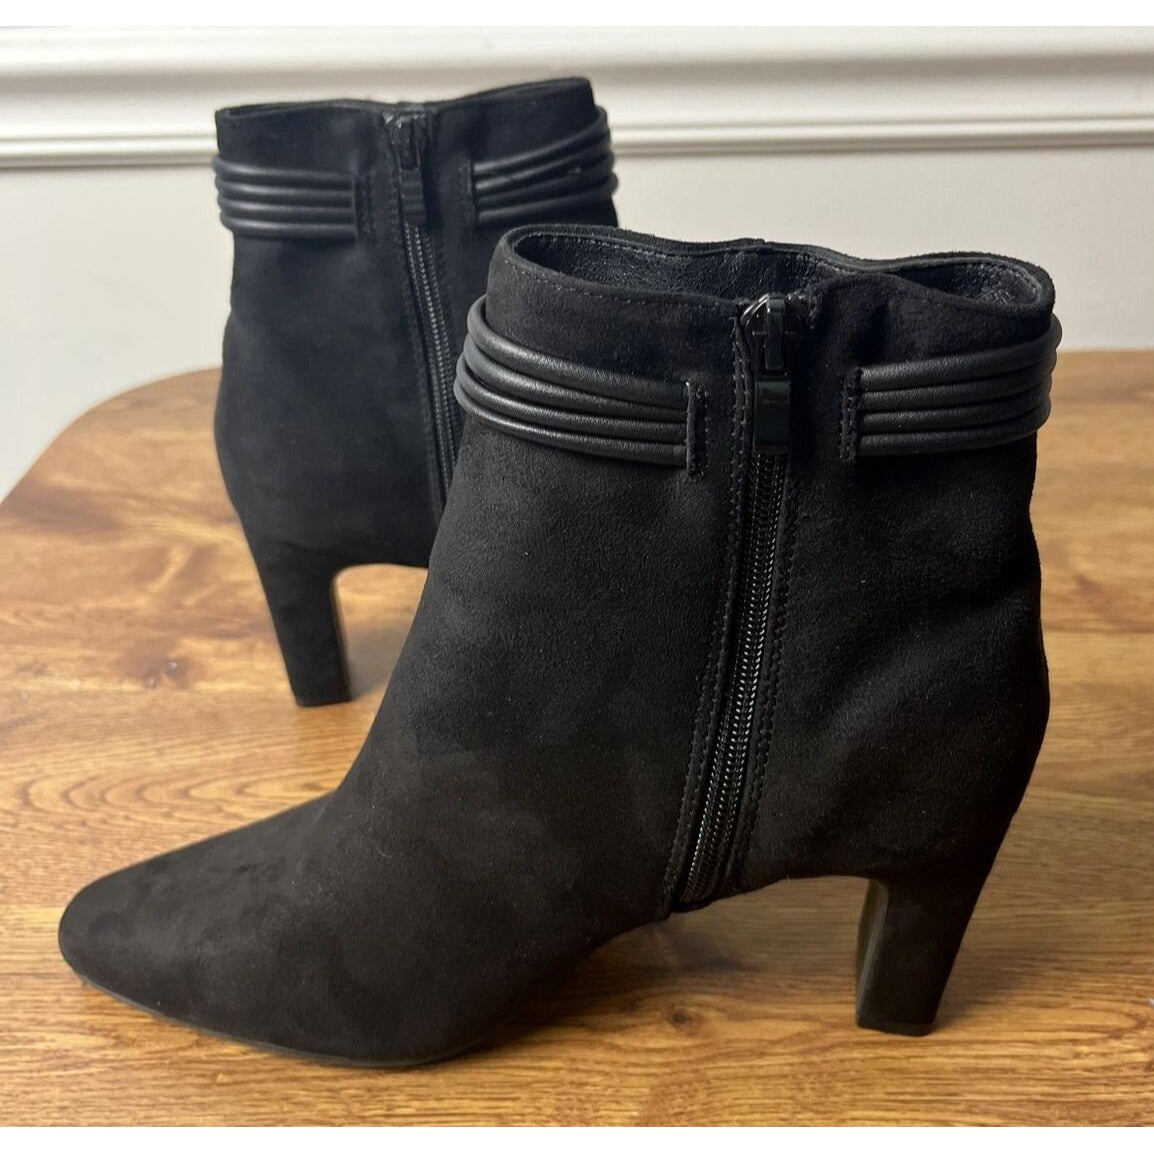 CL by Laundry Women's Never Ending Ankle Boot Black Size 7.5M